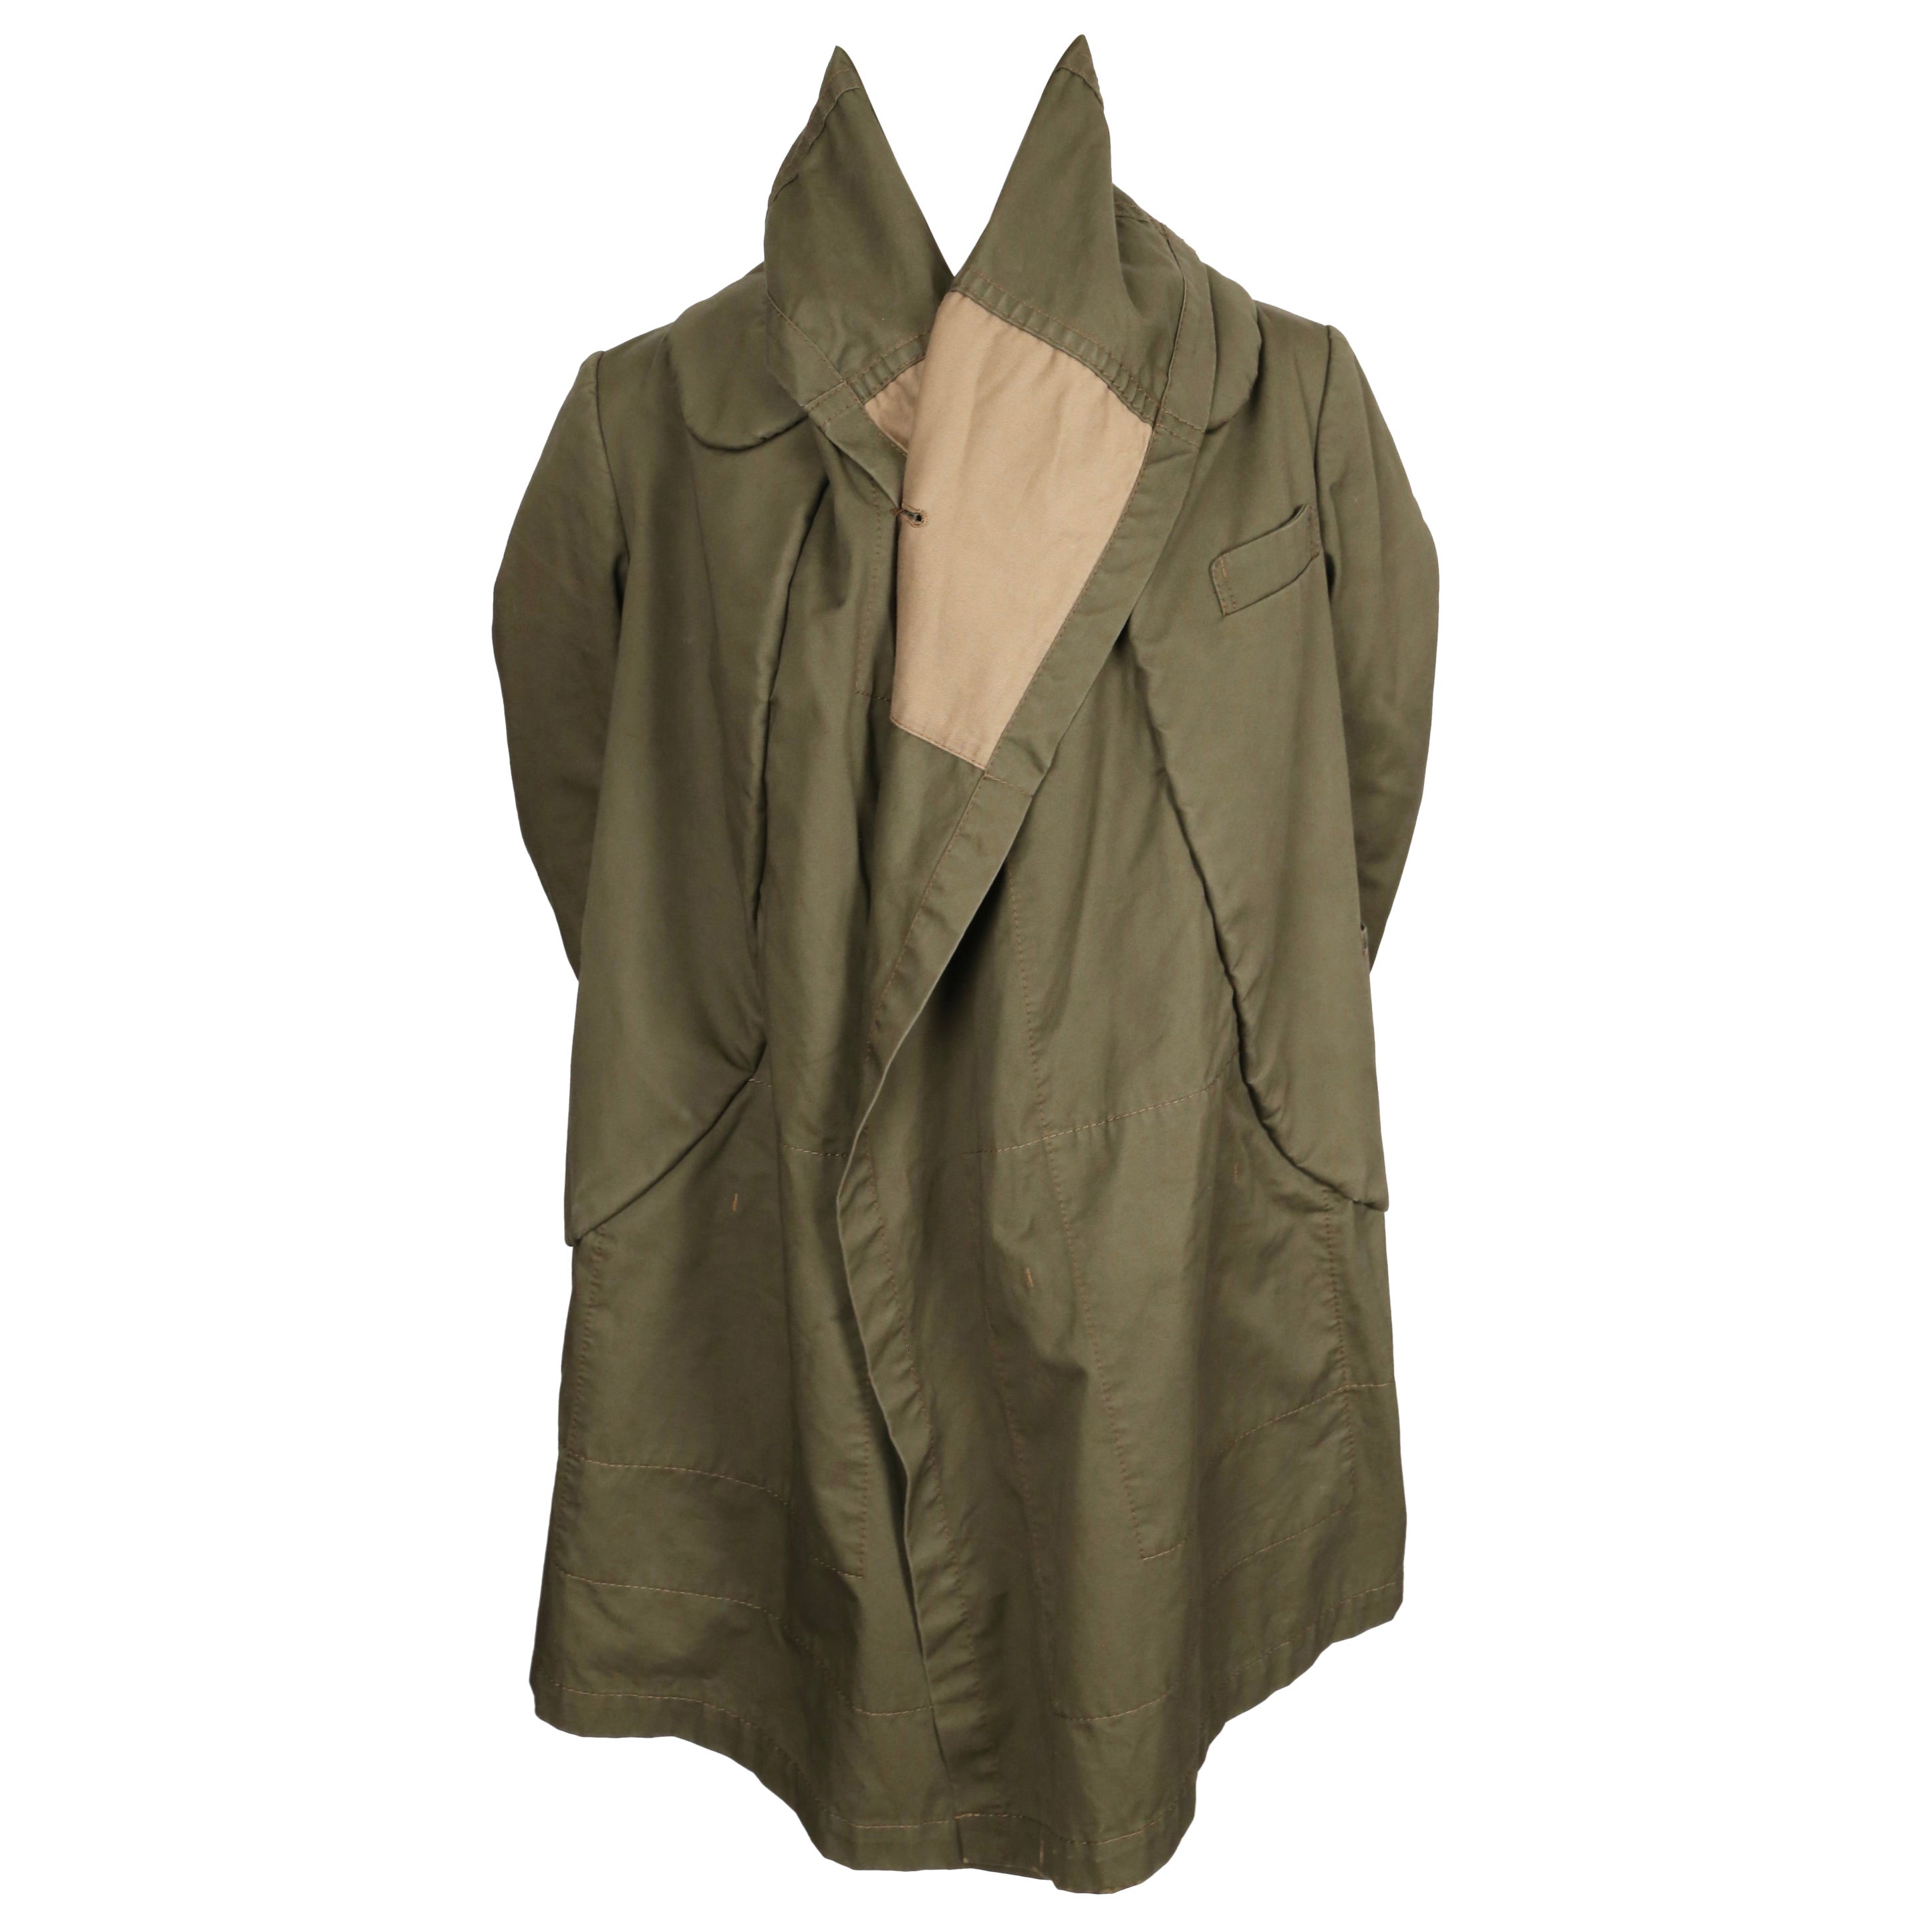 2009 COMME DES GARCONS army green cotton draped runway coat